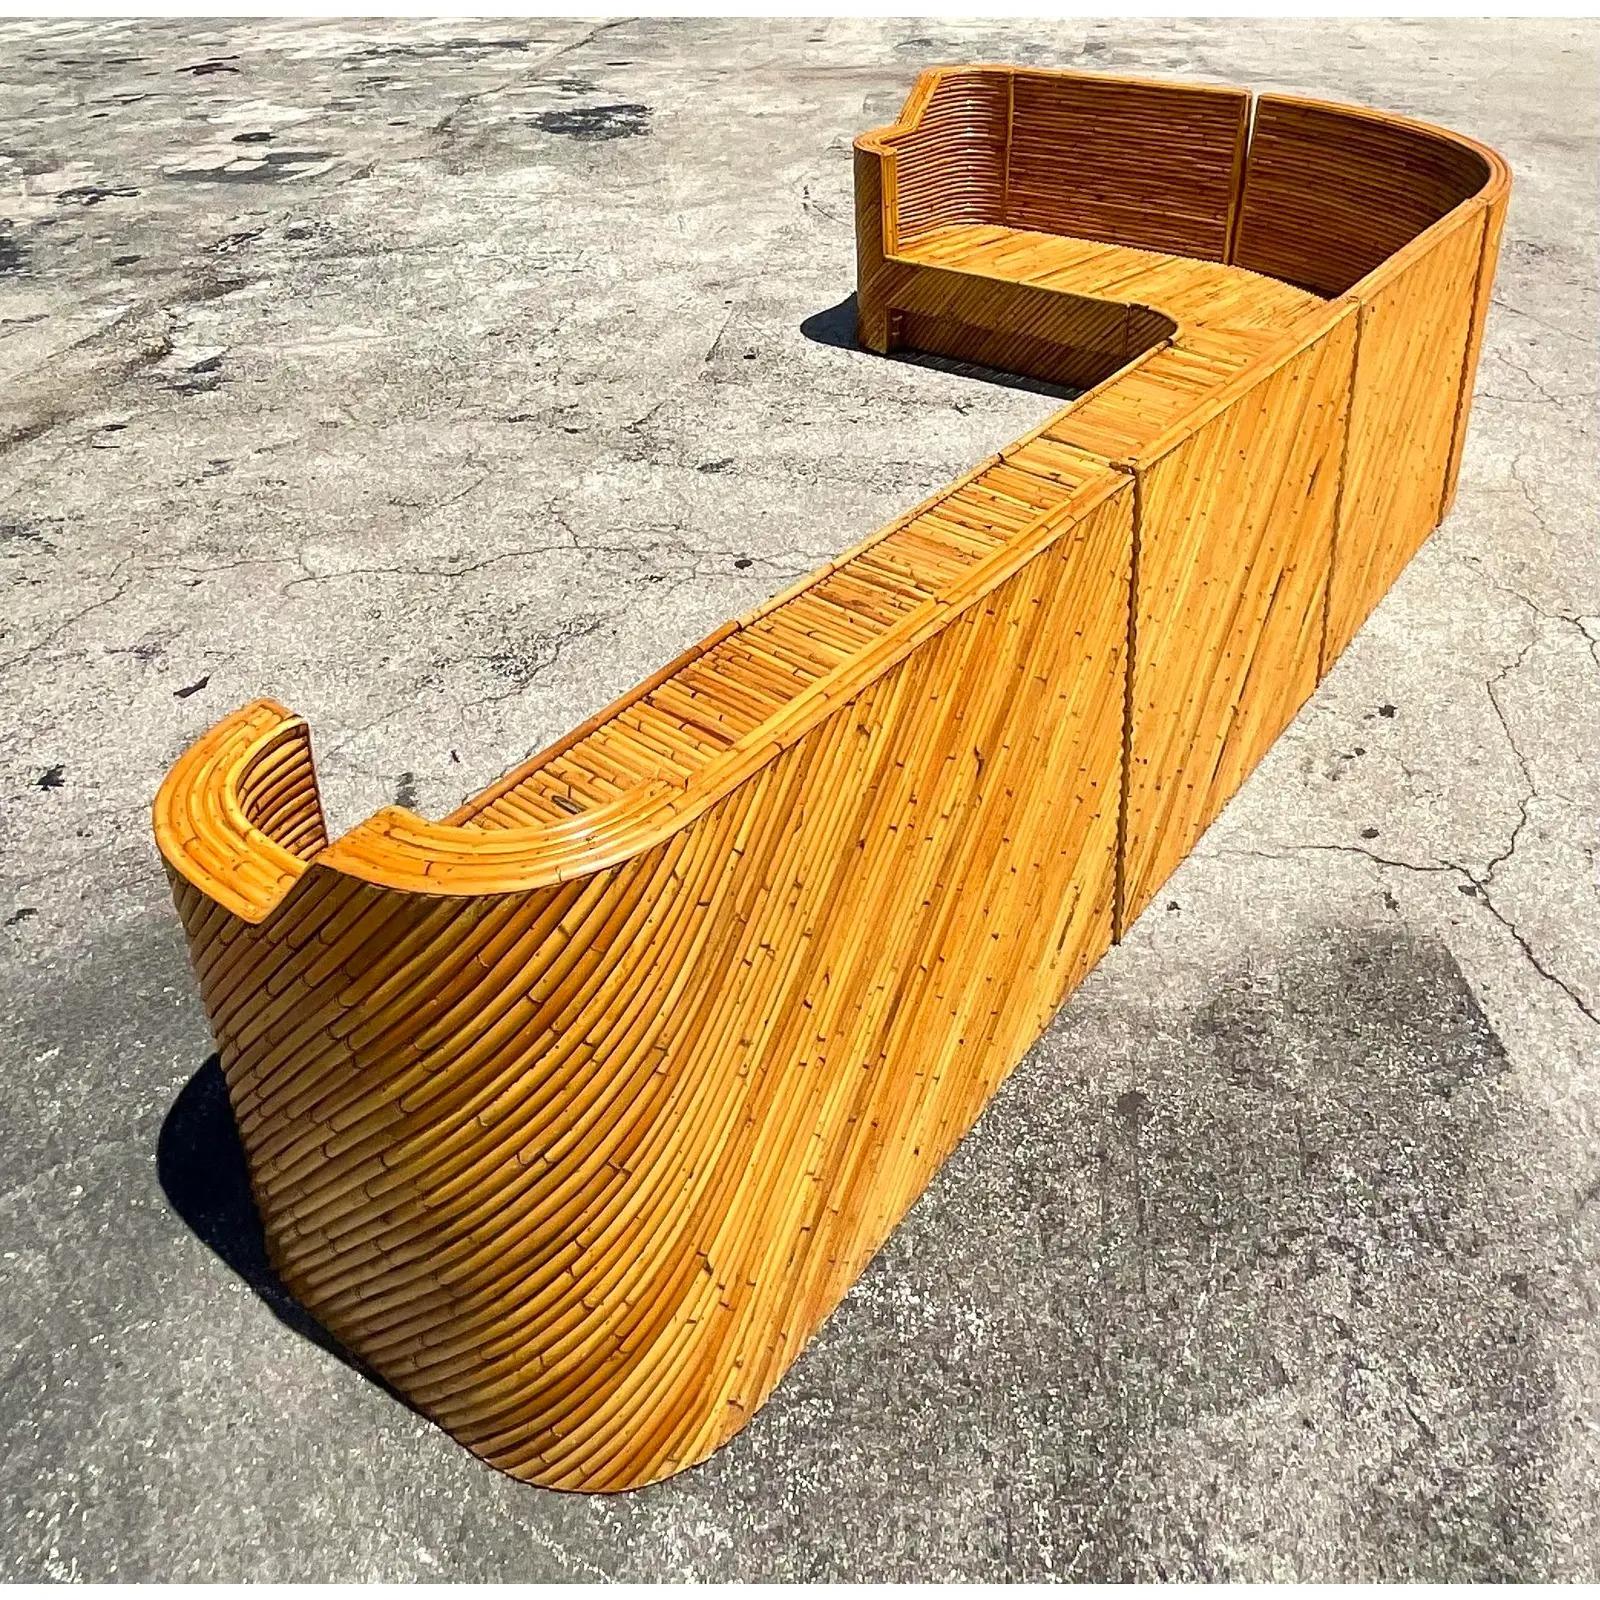 The most incredible vintage Coastal sectional sofa. Made from diagonally placed split rattan in a chic curved design. Beautiful from all sides. Ready to go! Acquired from a Palm Beach estate.